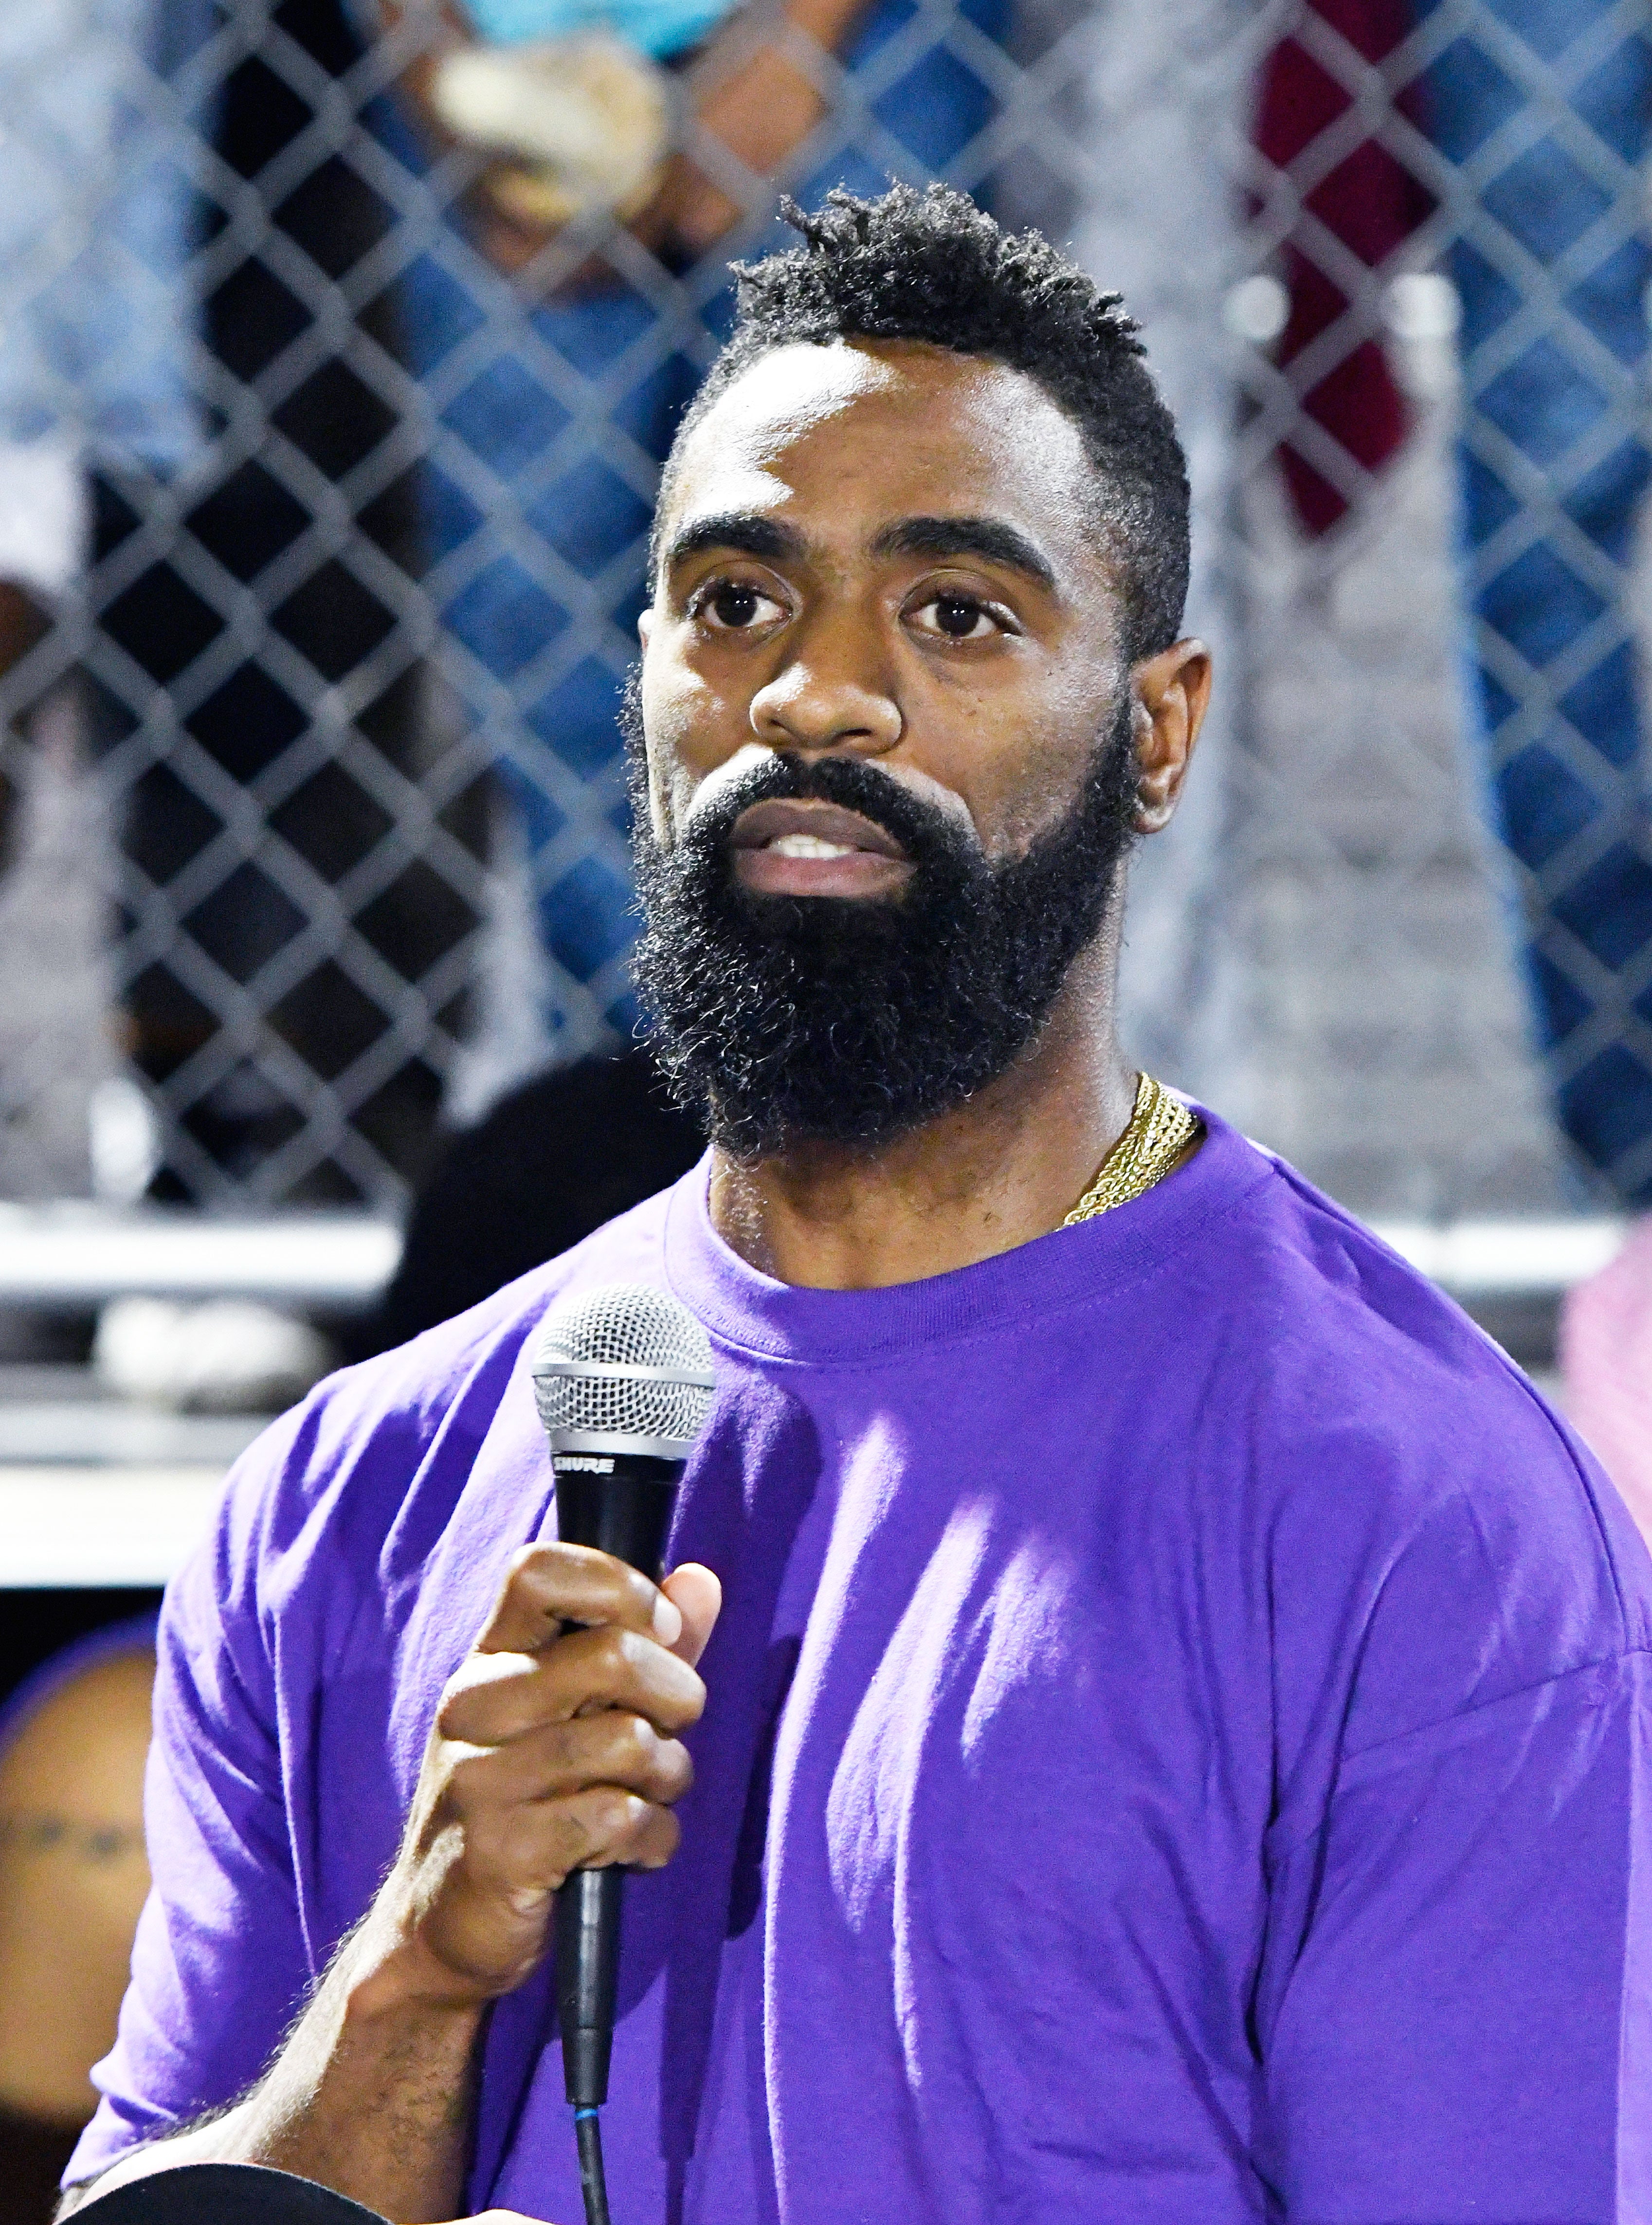 Tyson Gay Shares Emotional 'Thank You' With Fans, Calls For Peace And An End To Violence
